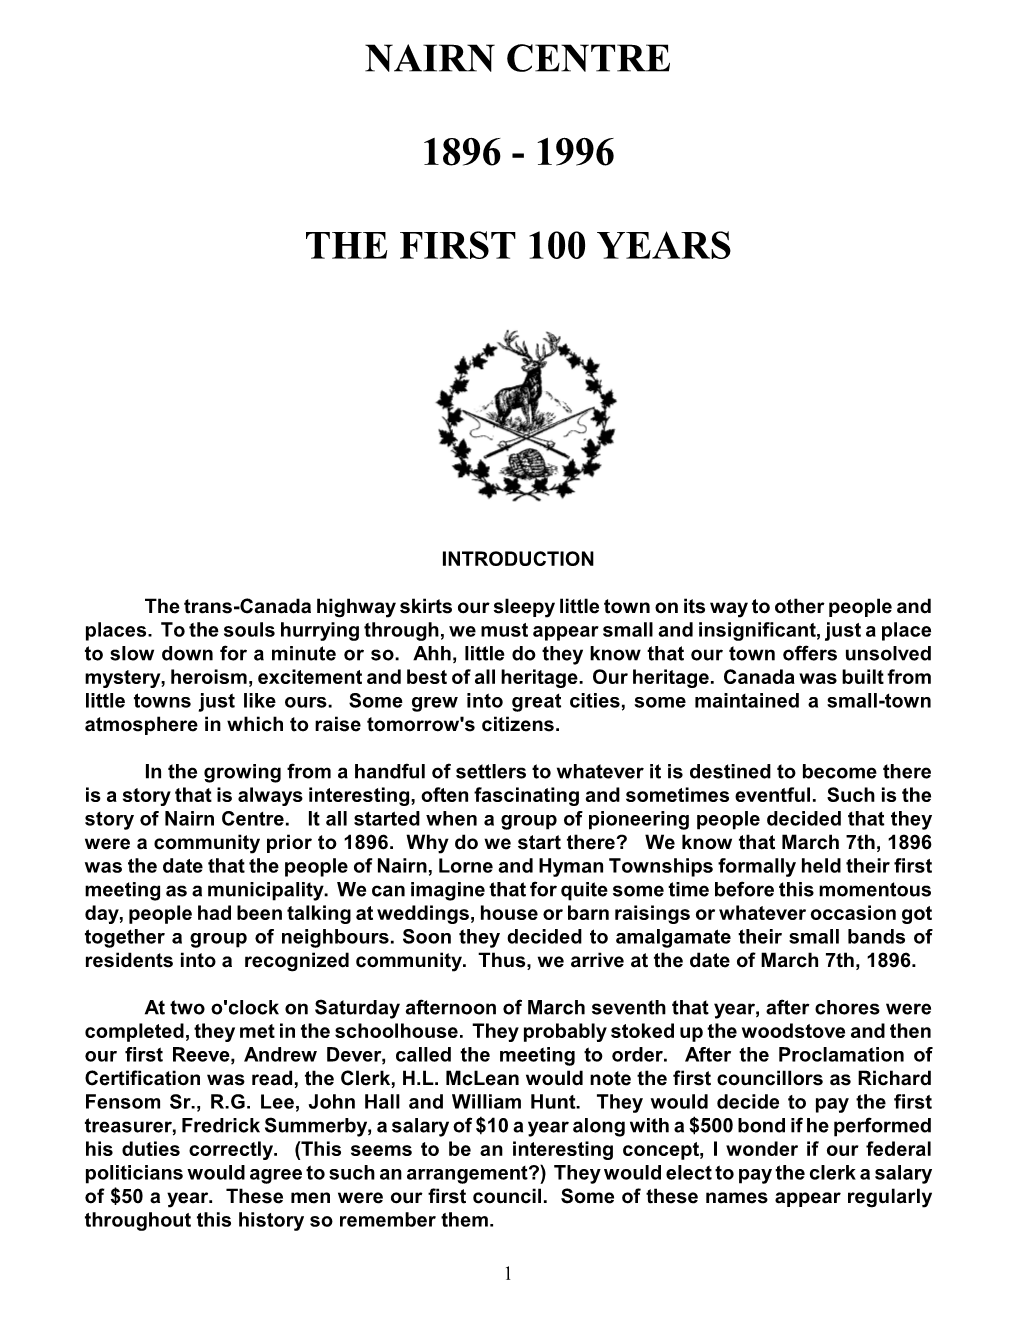 1996 the First 100 Years